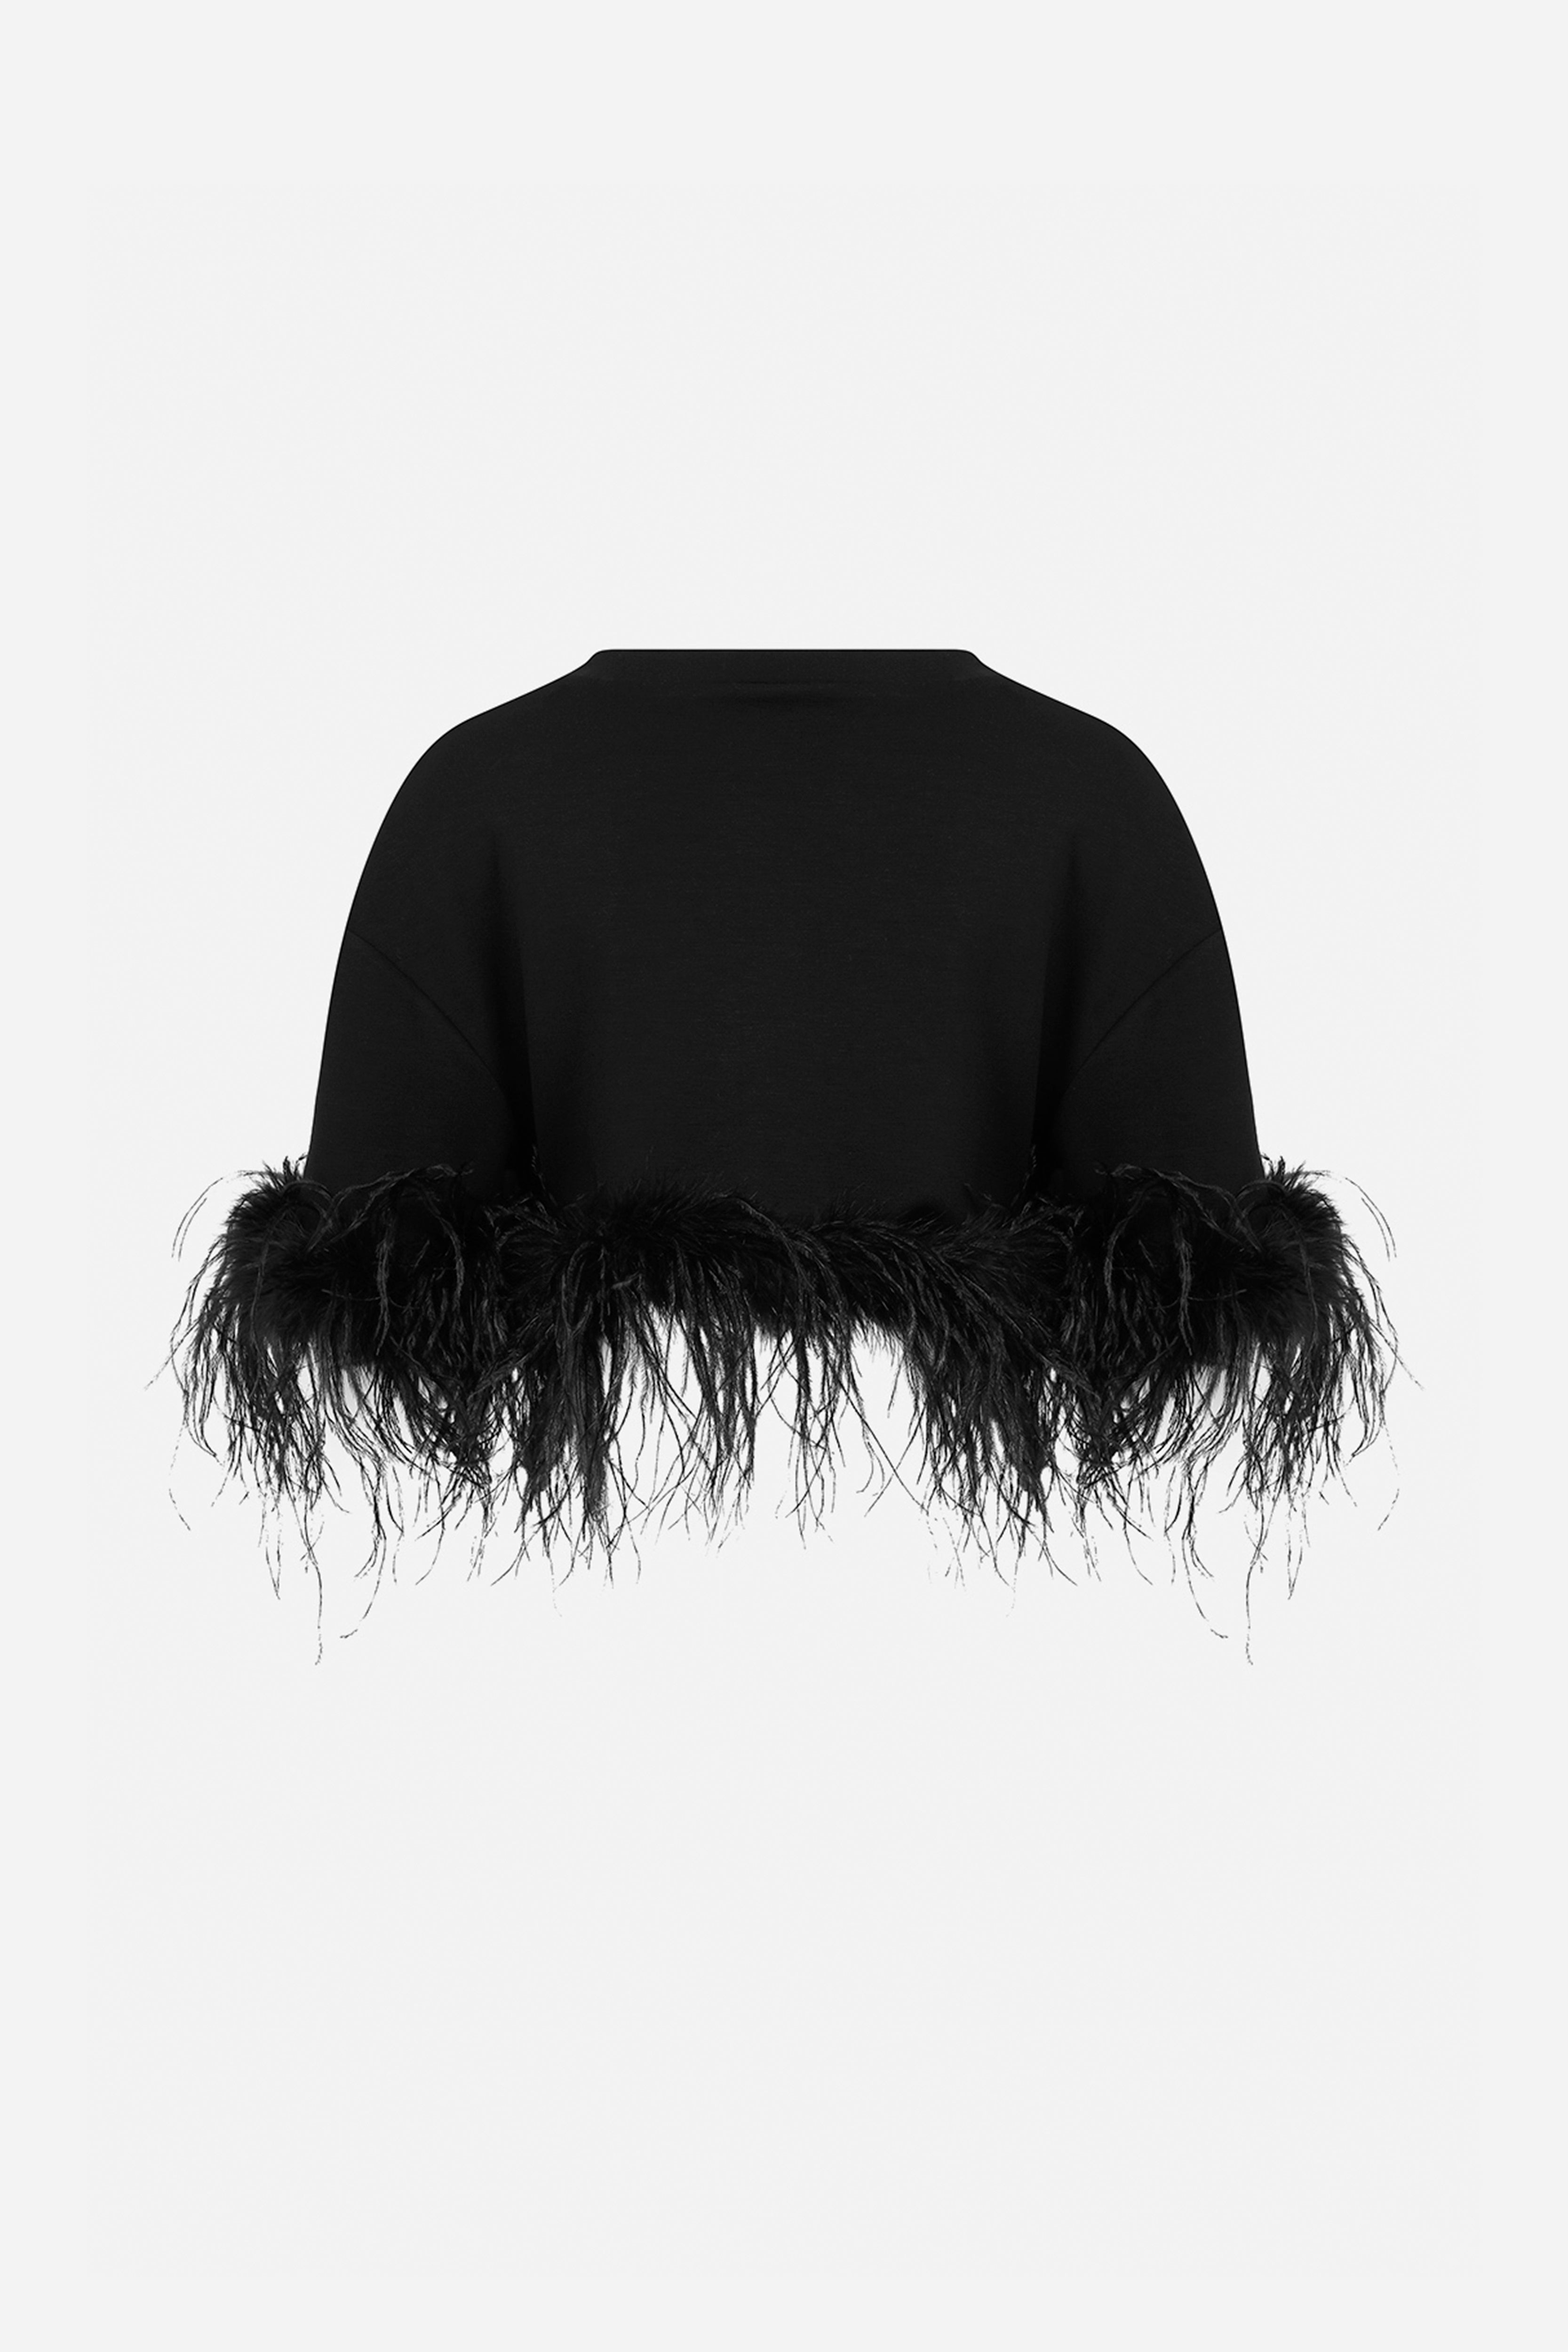 BELLA- CROP TOP WİTH FEATHERS IN BLACK